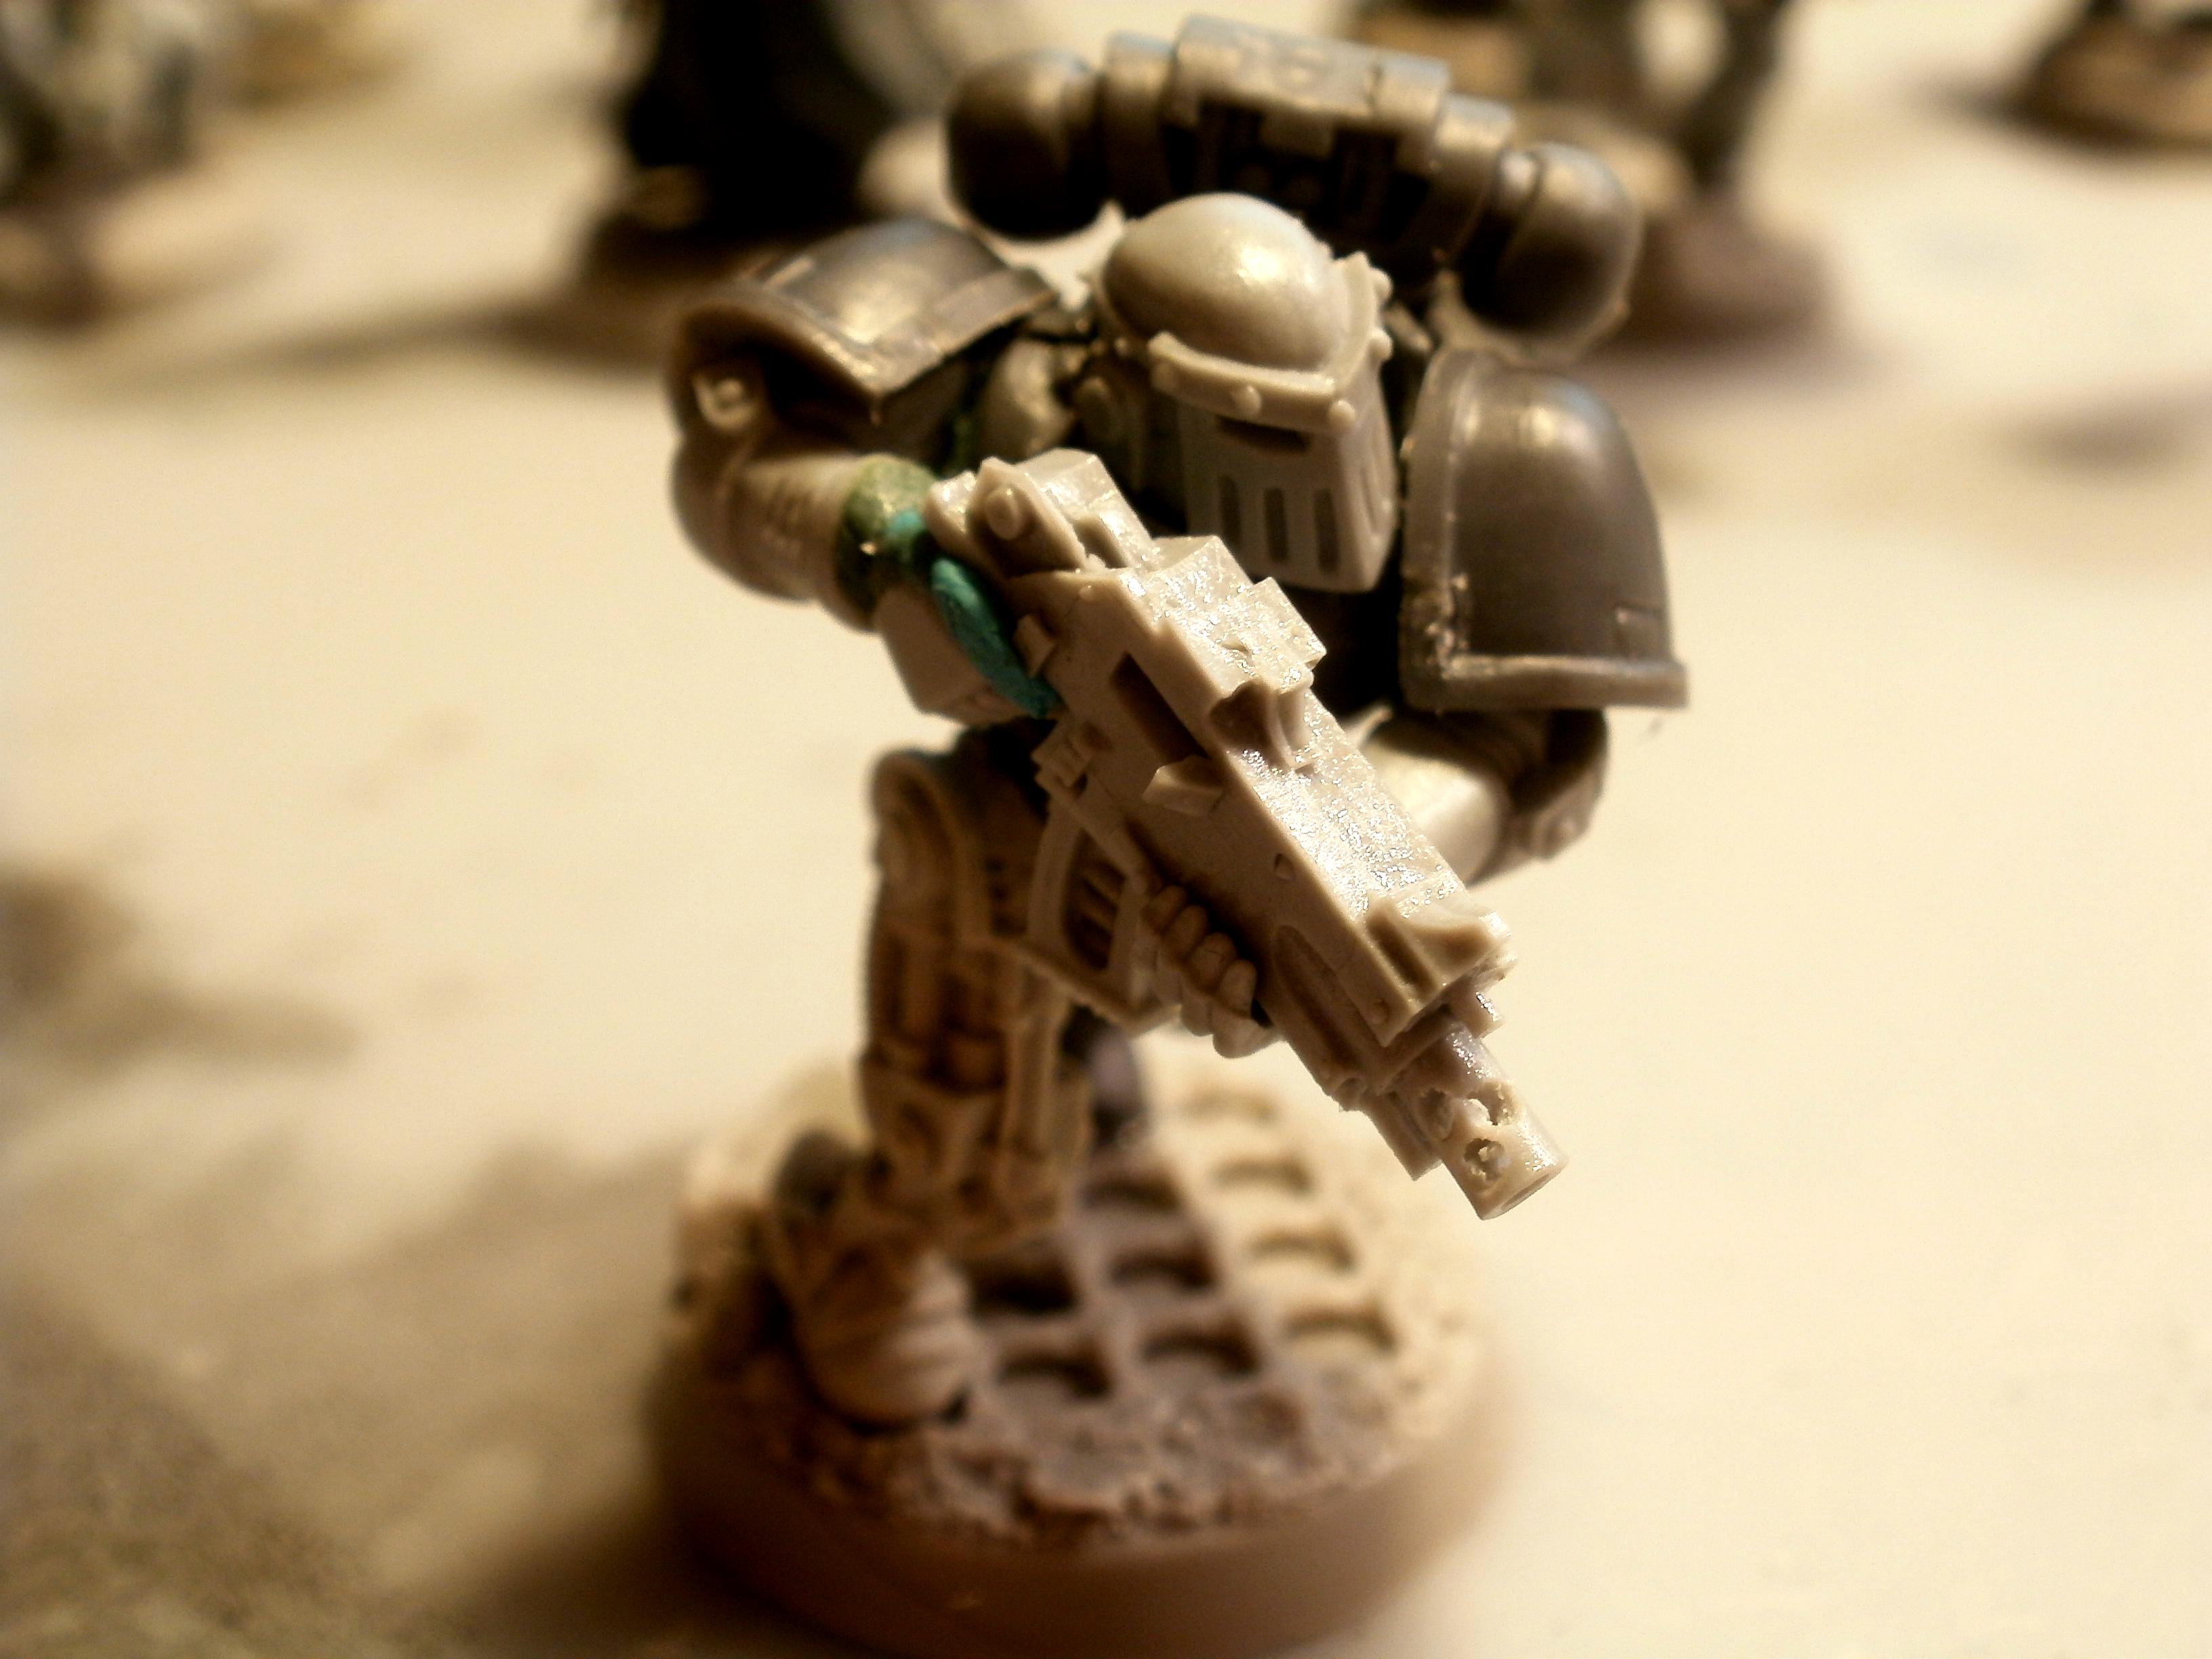 Bionics, Conversion, Dragon Forge, Forge World, Kitbash, Maxmini, Space Marines, Steel Confessors, Tactical, Work In Progress